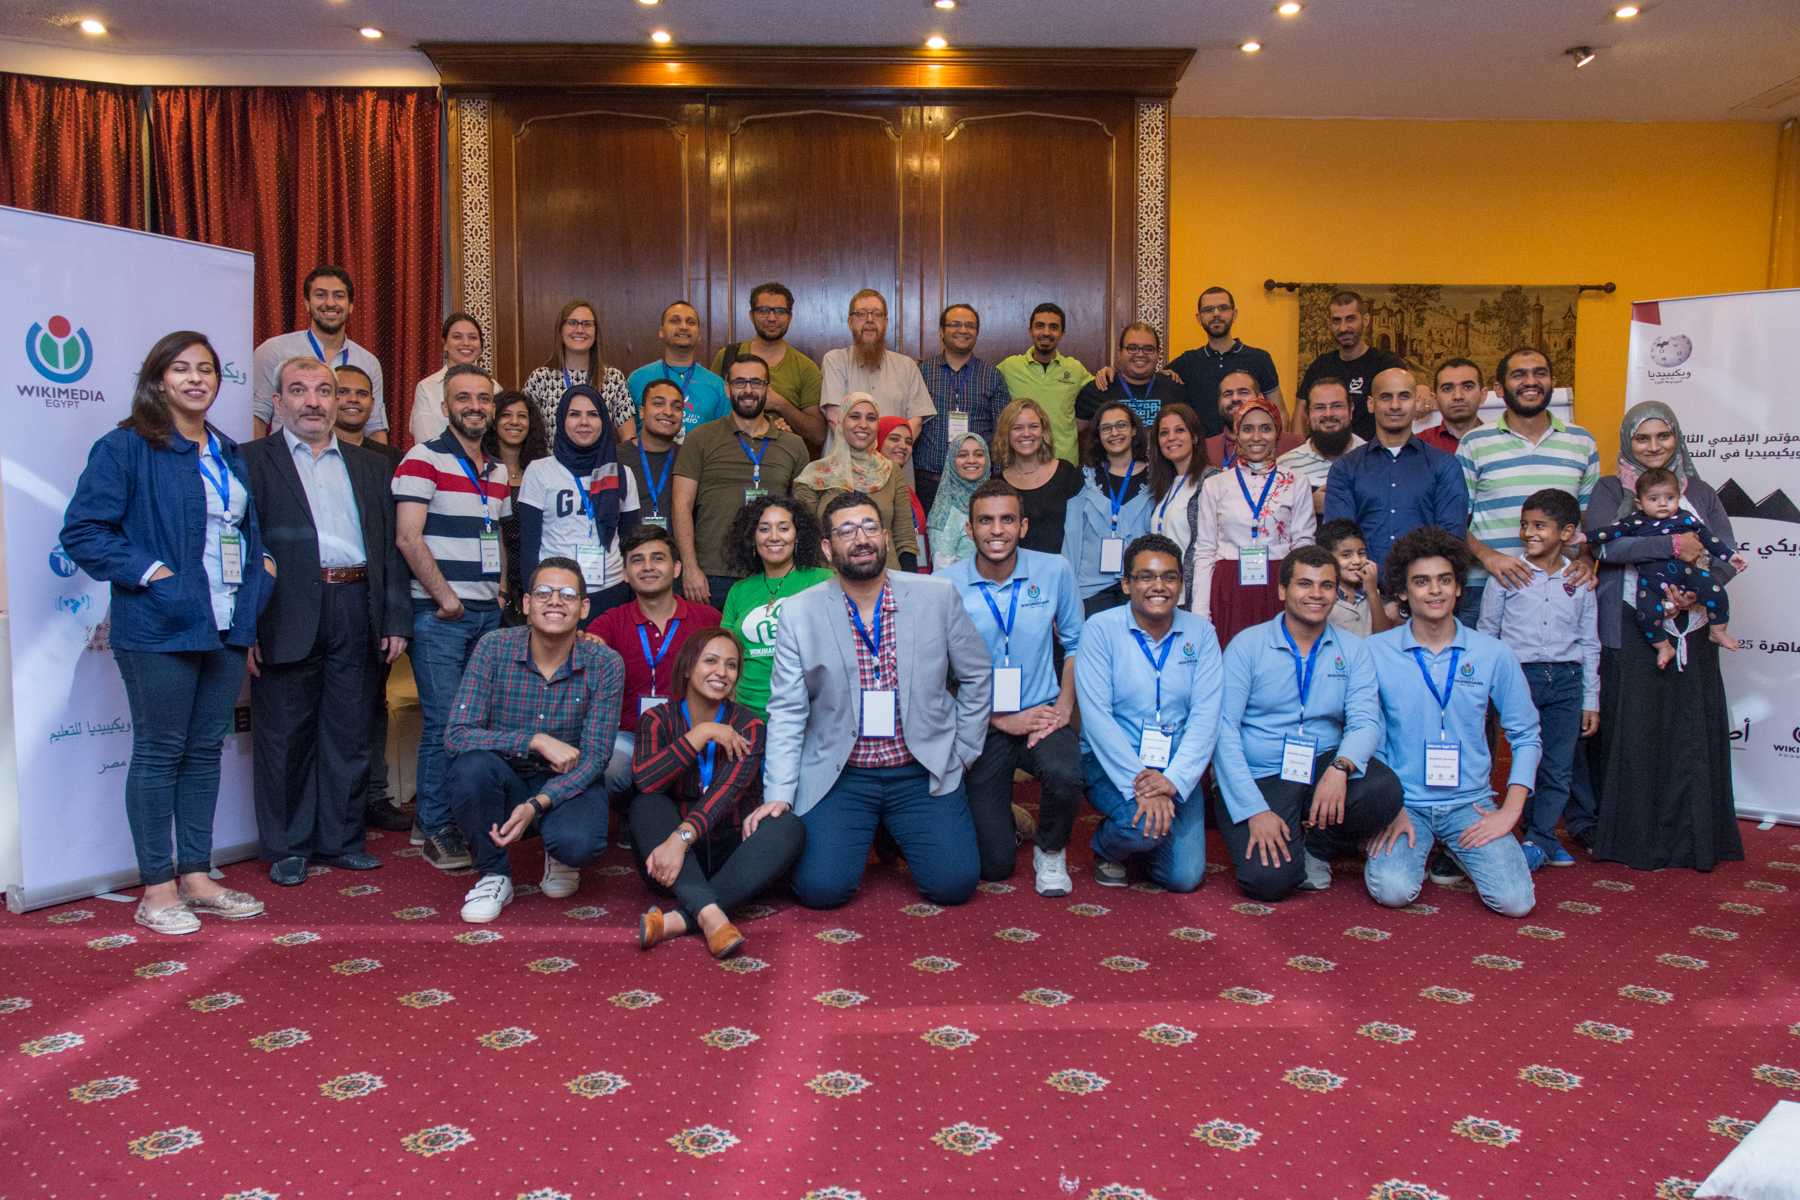 Photo taken at the end of WikiArabia2017 hosted by Wikimedia Egypt